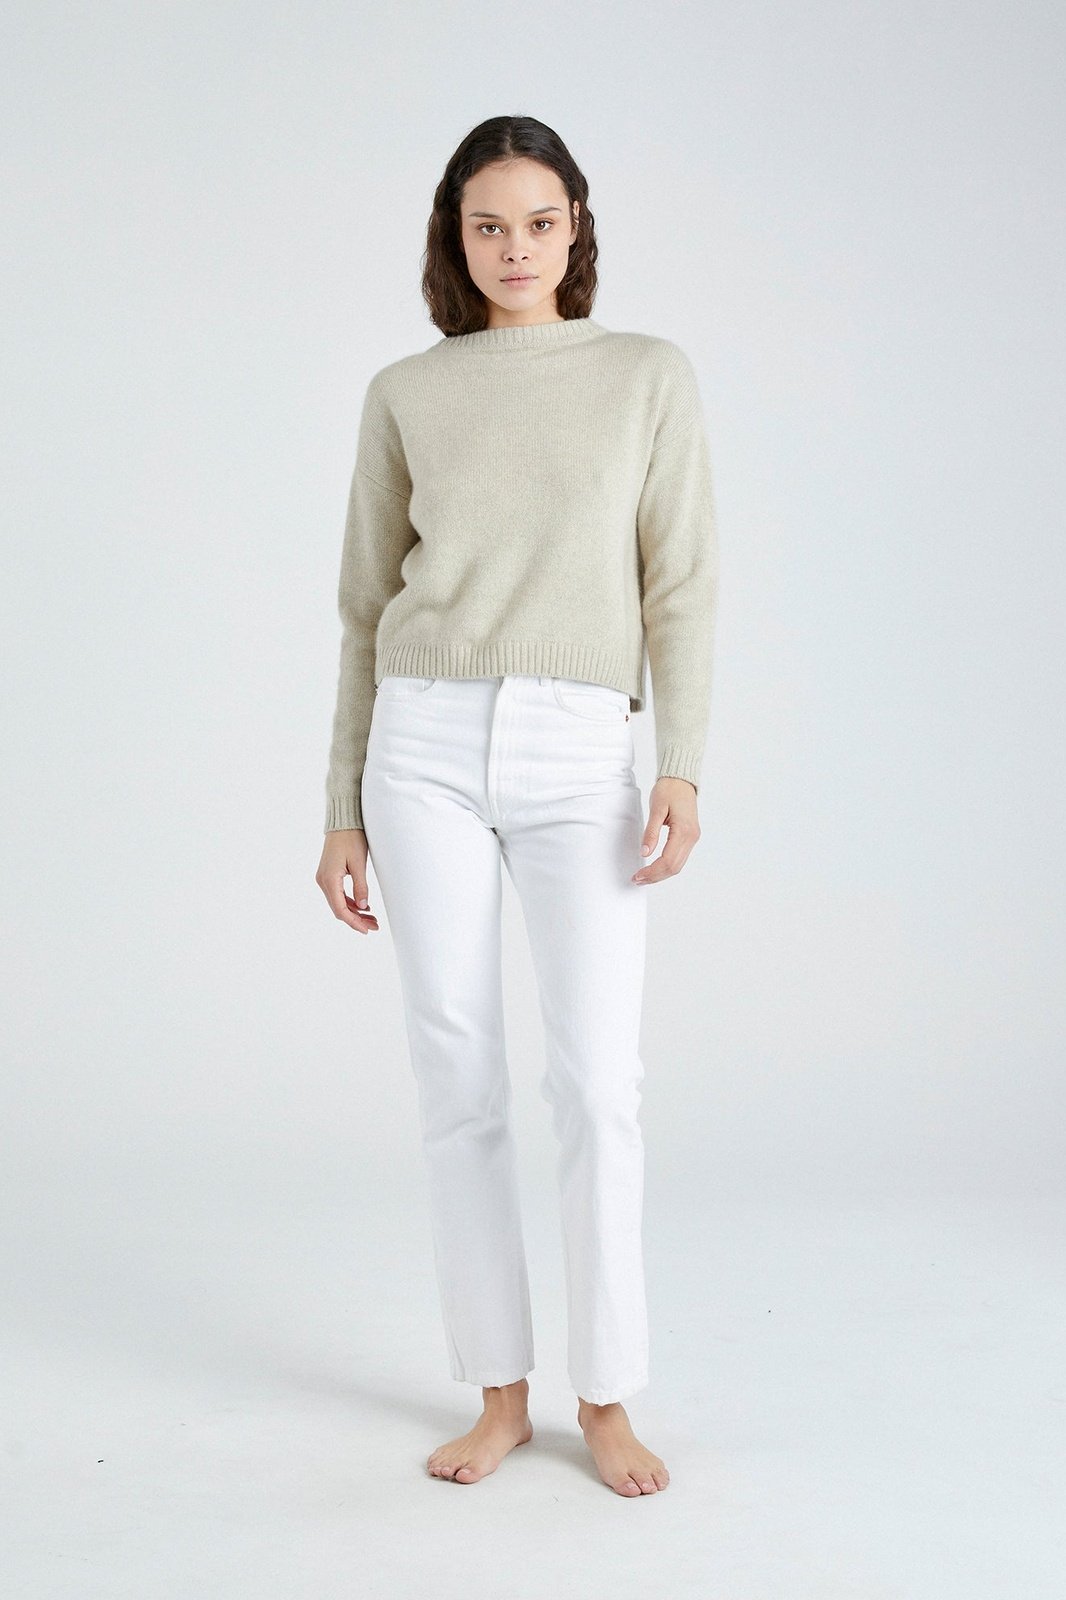 + Beryll Holly Cashmere Sweater | Shell Beach - + Beryll Holly Cashmere Sweater | Shell Beach - +Beryll Worn By Good People